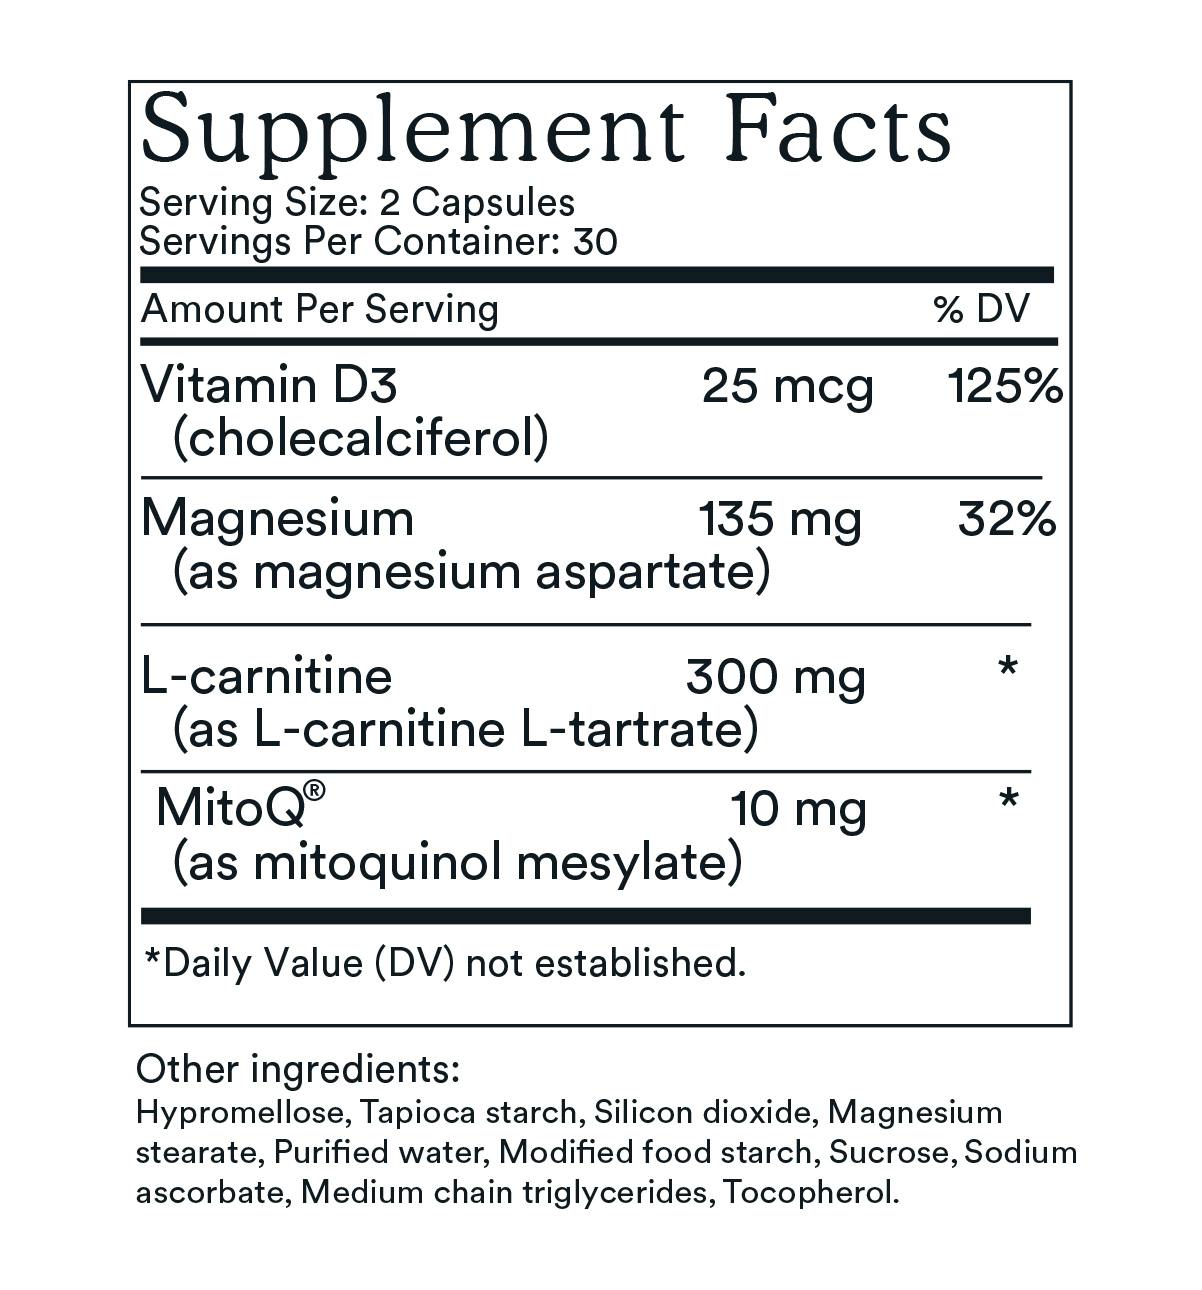 Supplement Facts label for MitoQ +heart